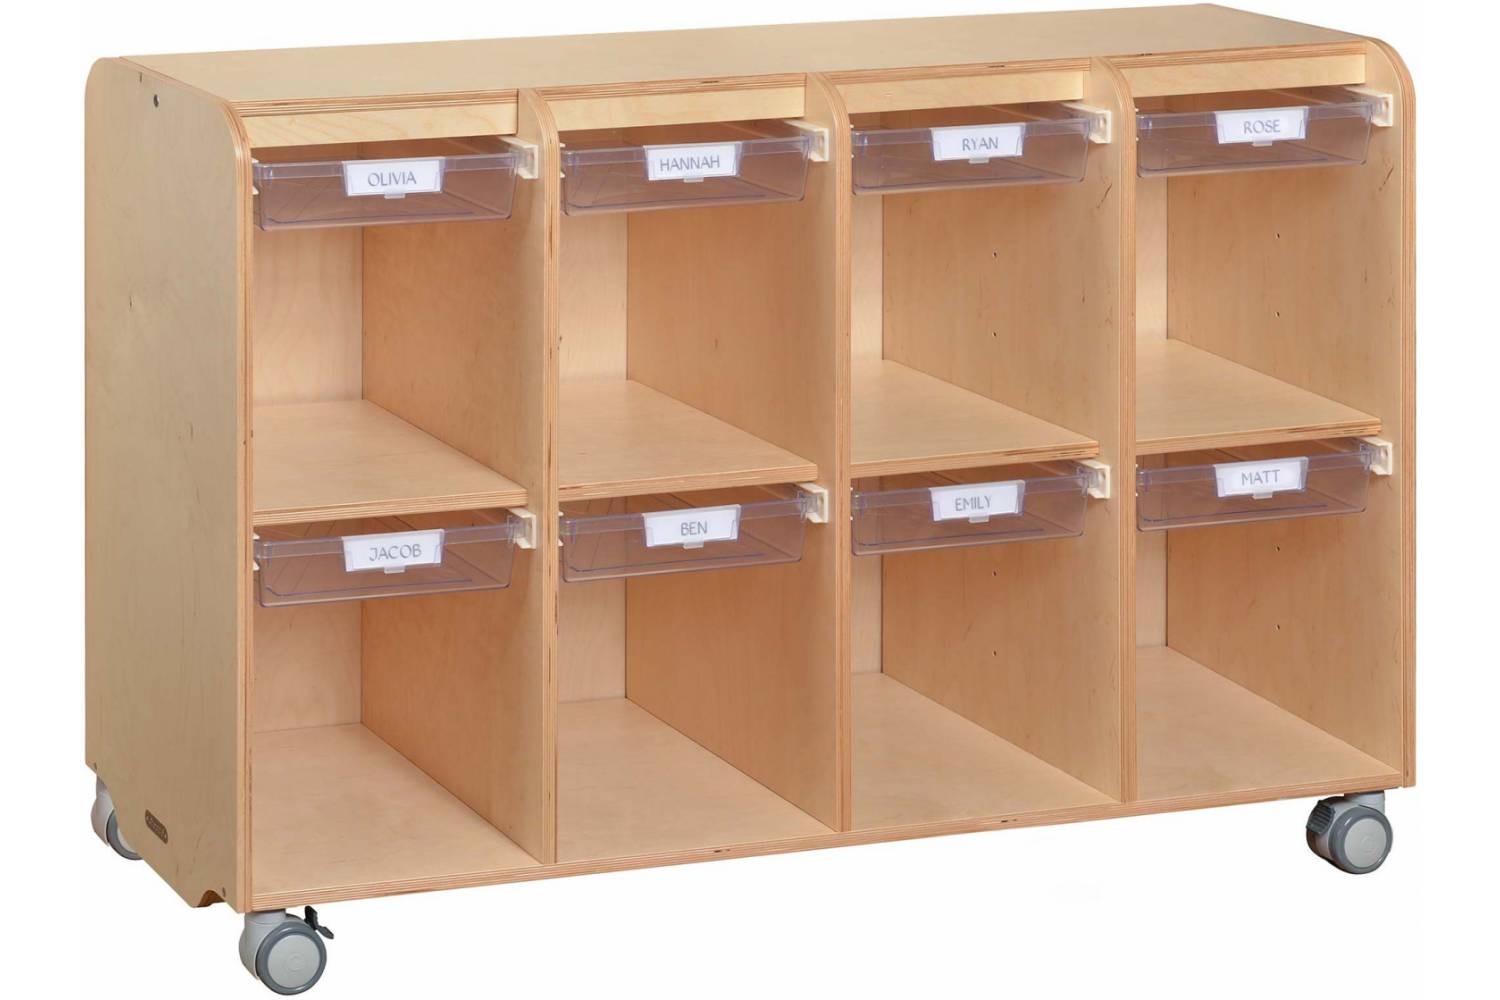 movable cubby storage station